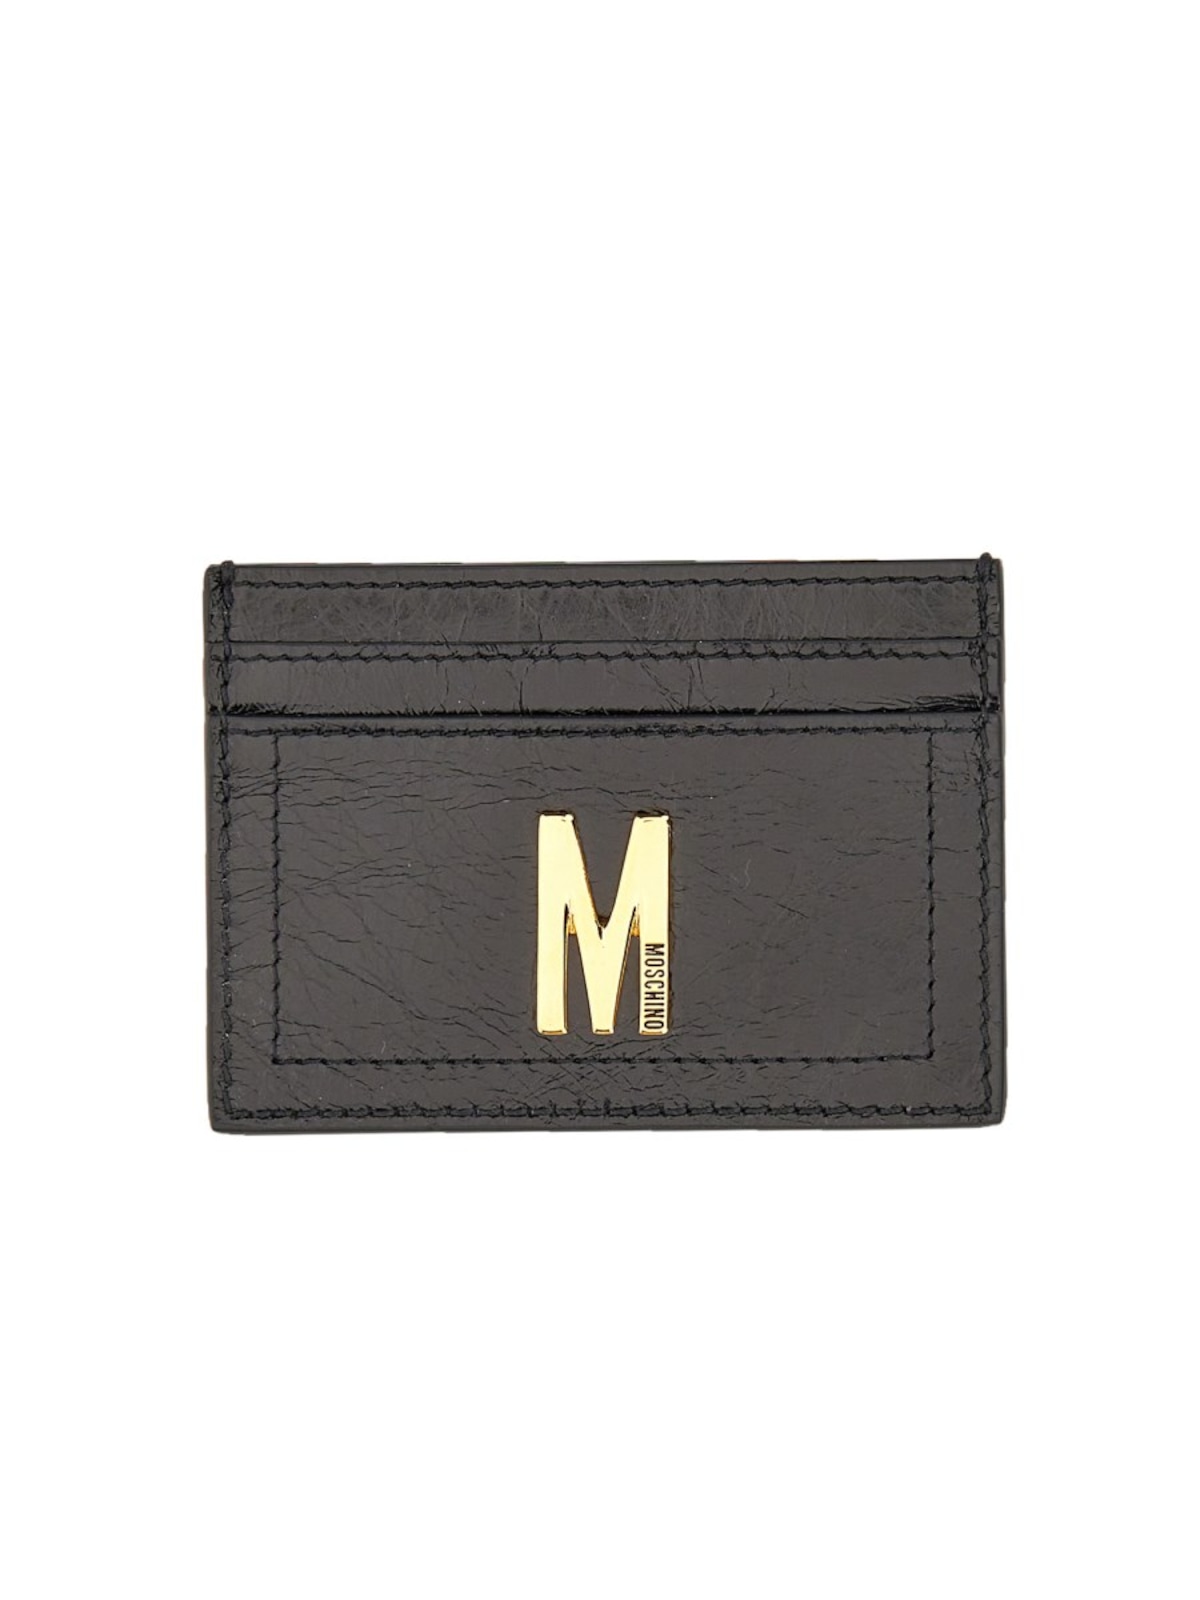 MOSCHINO CARD HOLDER WITH GOLD PLAQUE 81128006_0555 108214 | BASE百貨店